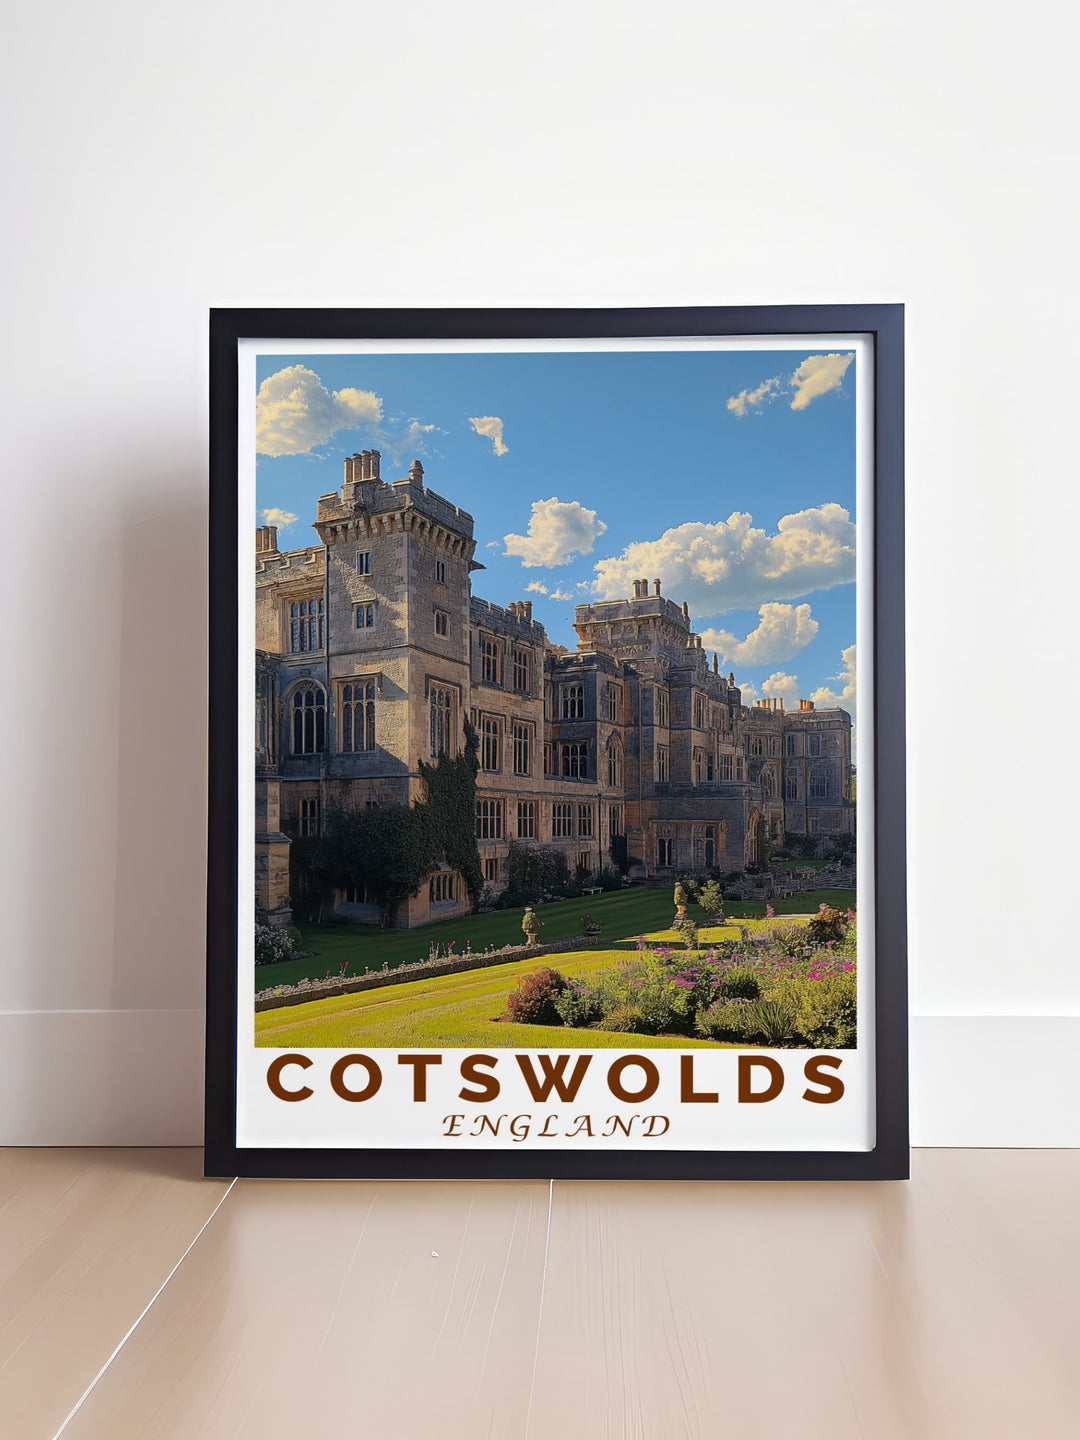 Highlighting the serene vistas of the Cotswolds and the regal atmosphere of Sudeley Castle, this travel poster is perfect for those who appreciate the scenic and historical richness of England.